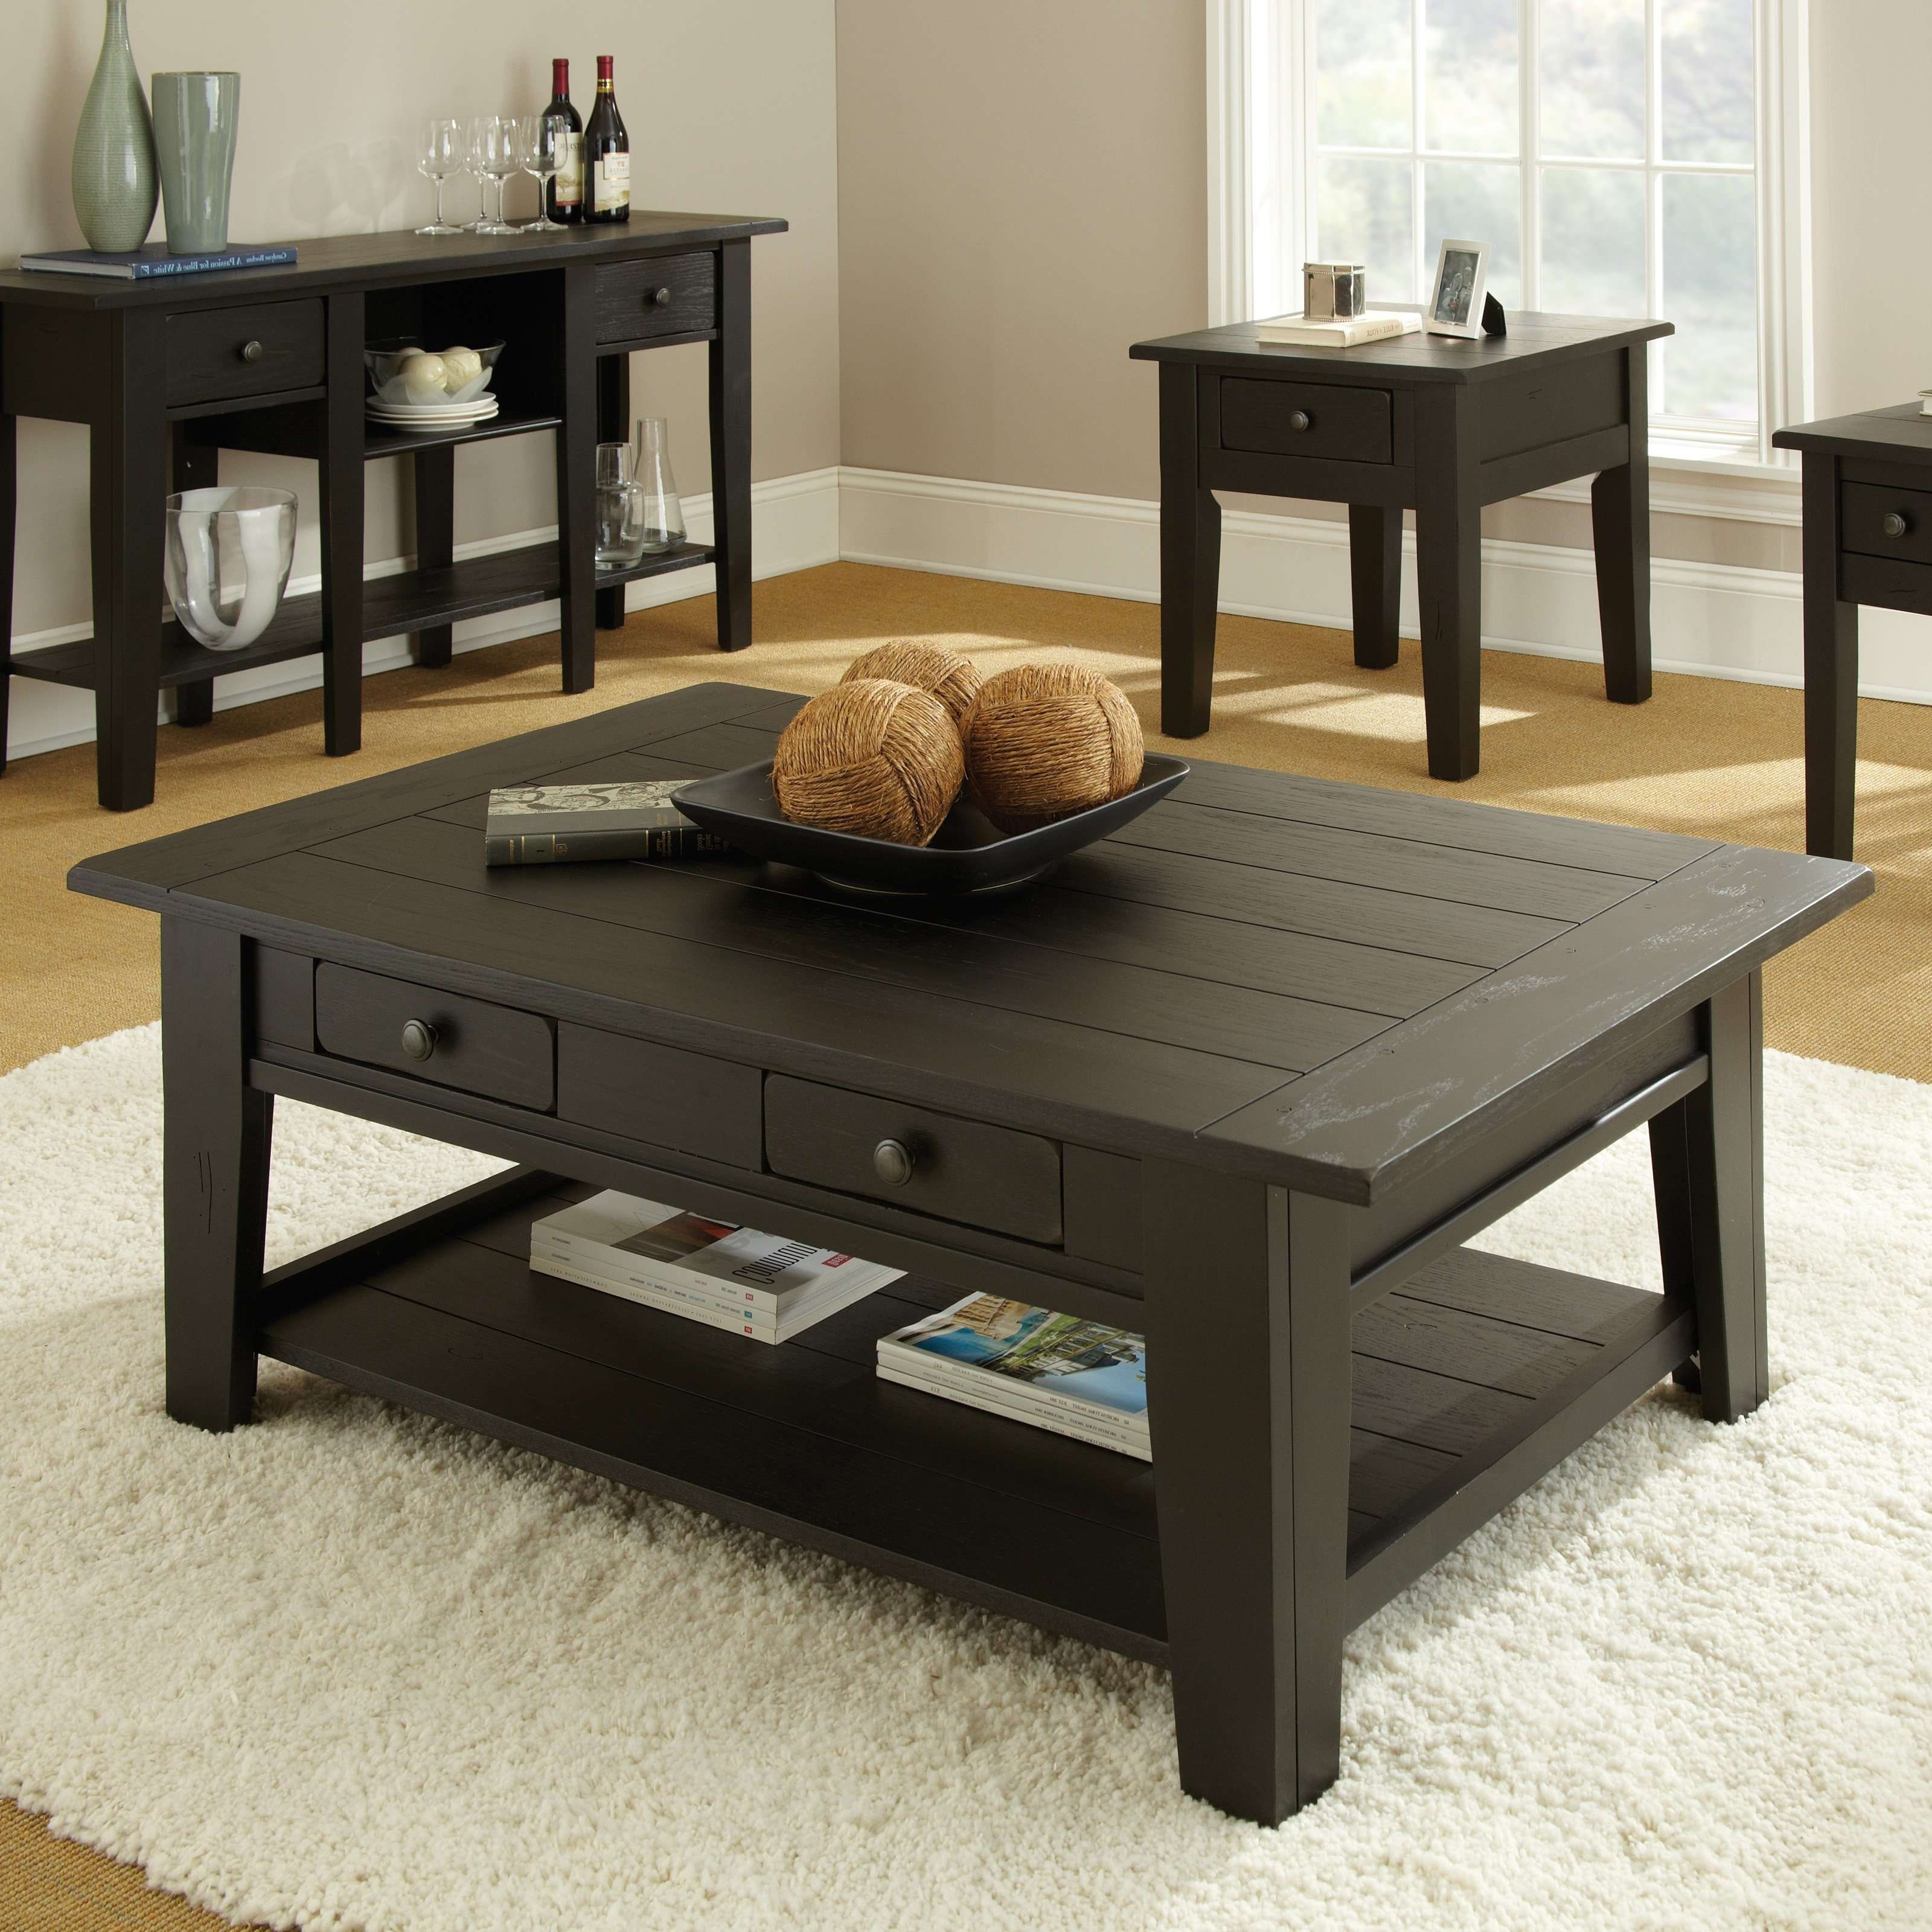 Coffee Tables : White And Glass Coffee Table Small Black Square Inside Favorite Black Coffee Tables With Storage (View 2 of 20)